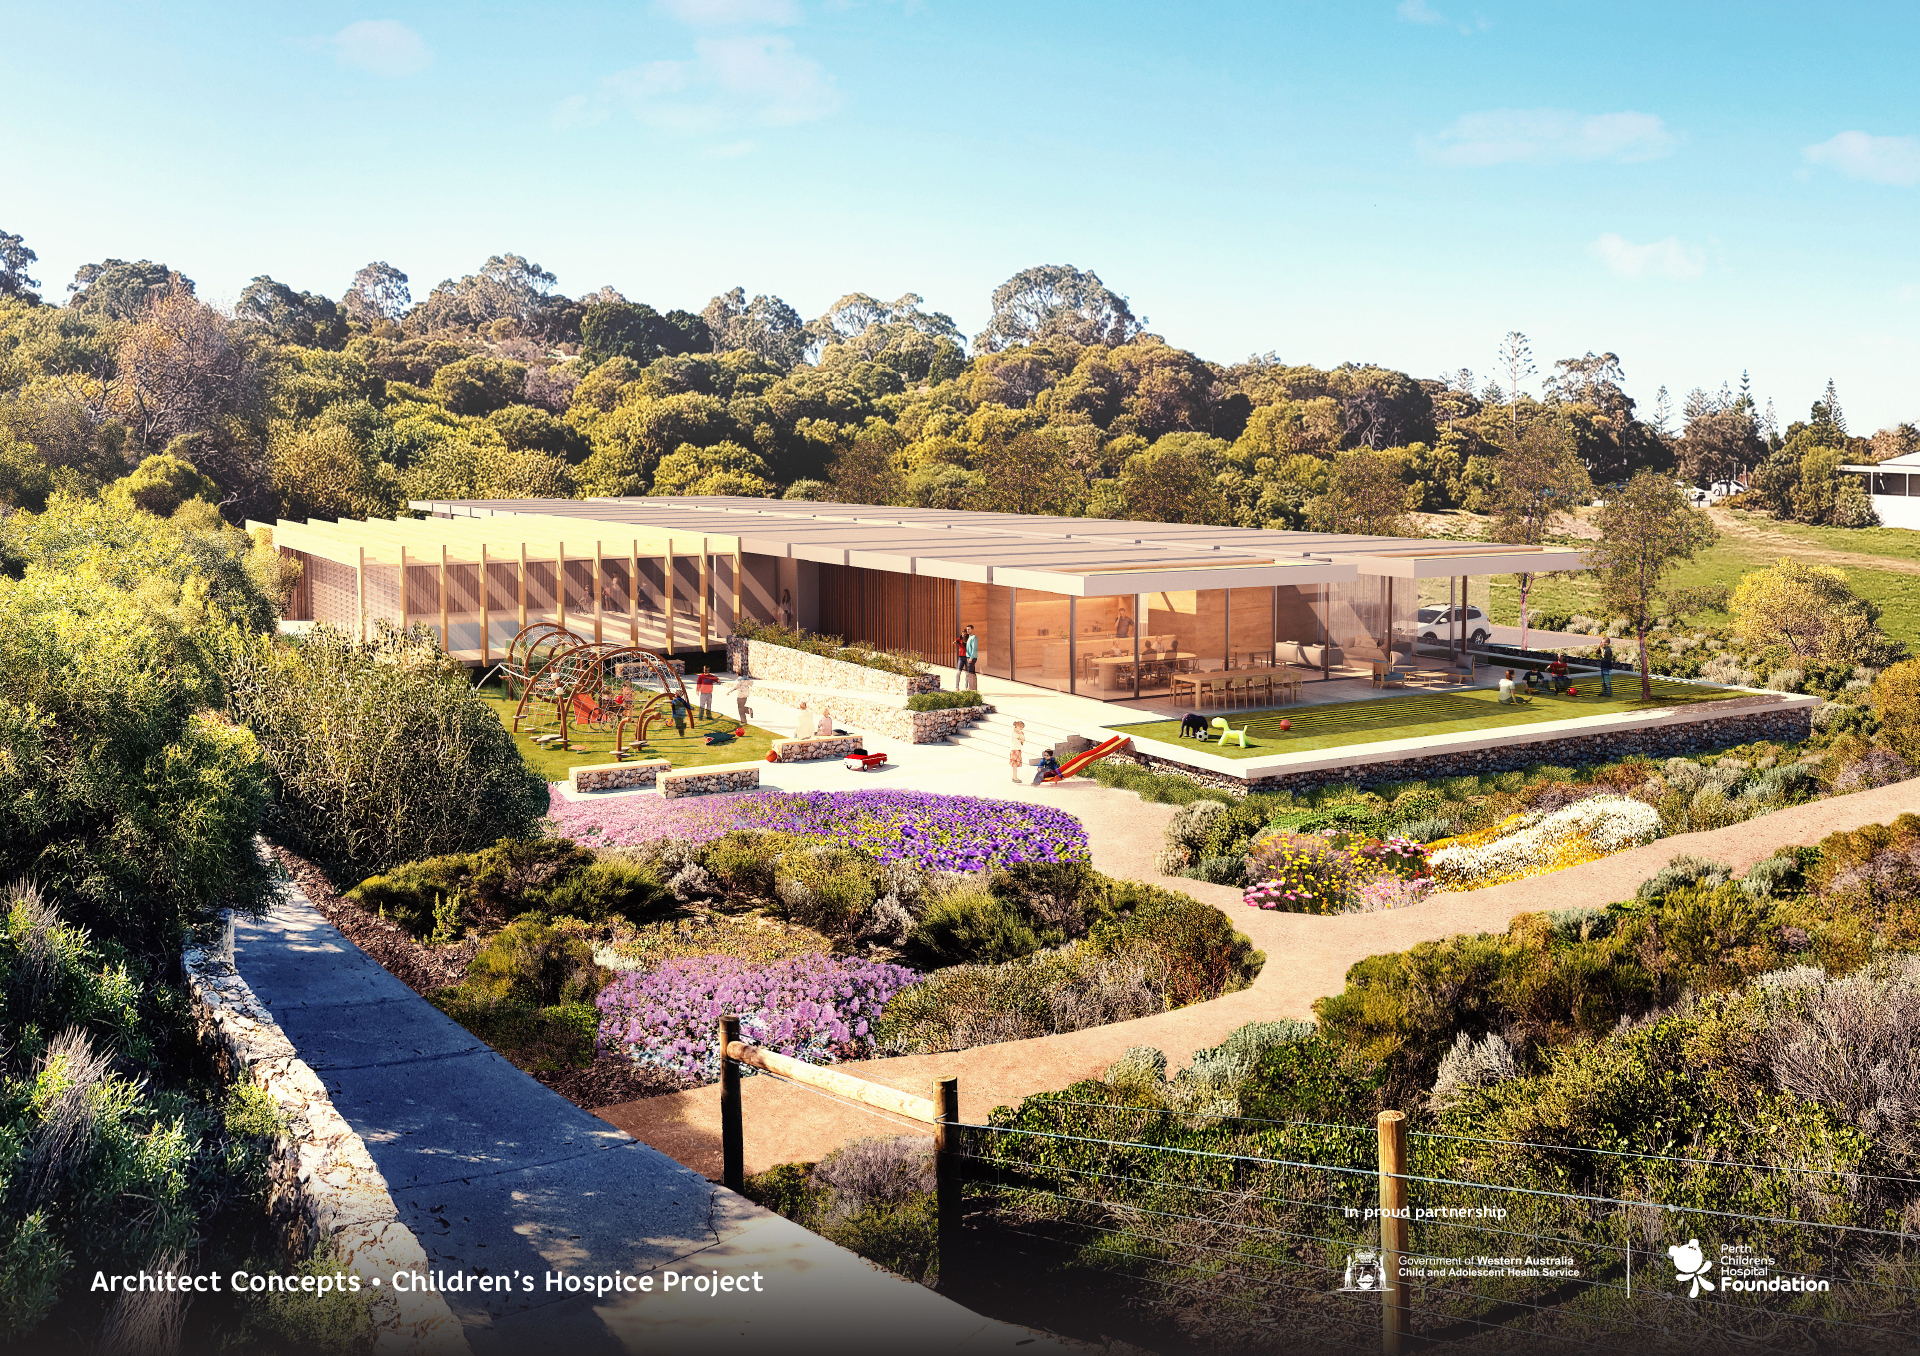 Artist render of the Children's Hospice Project